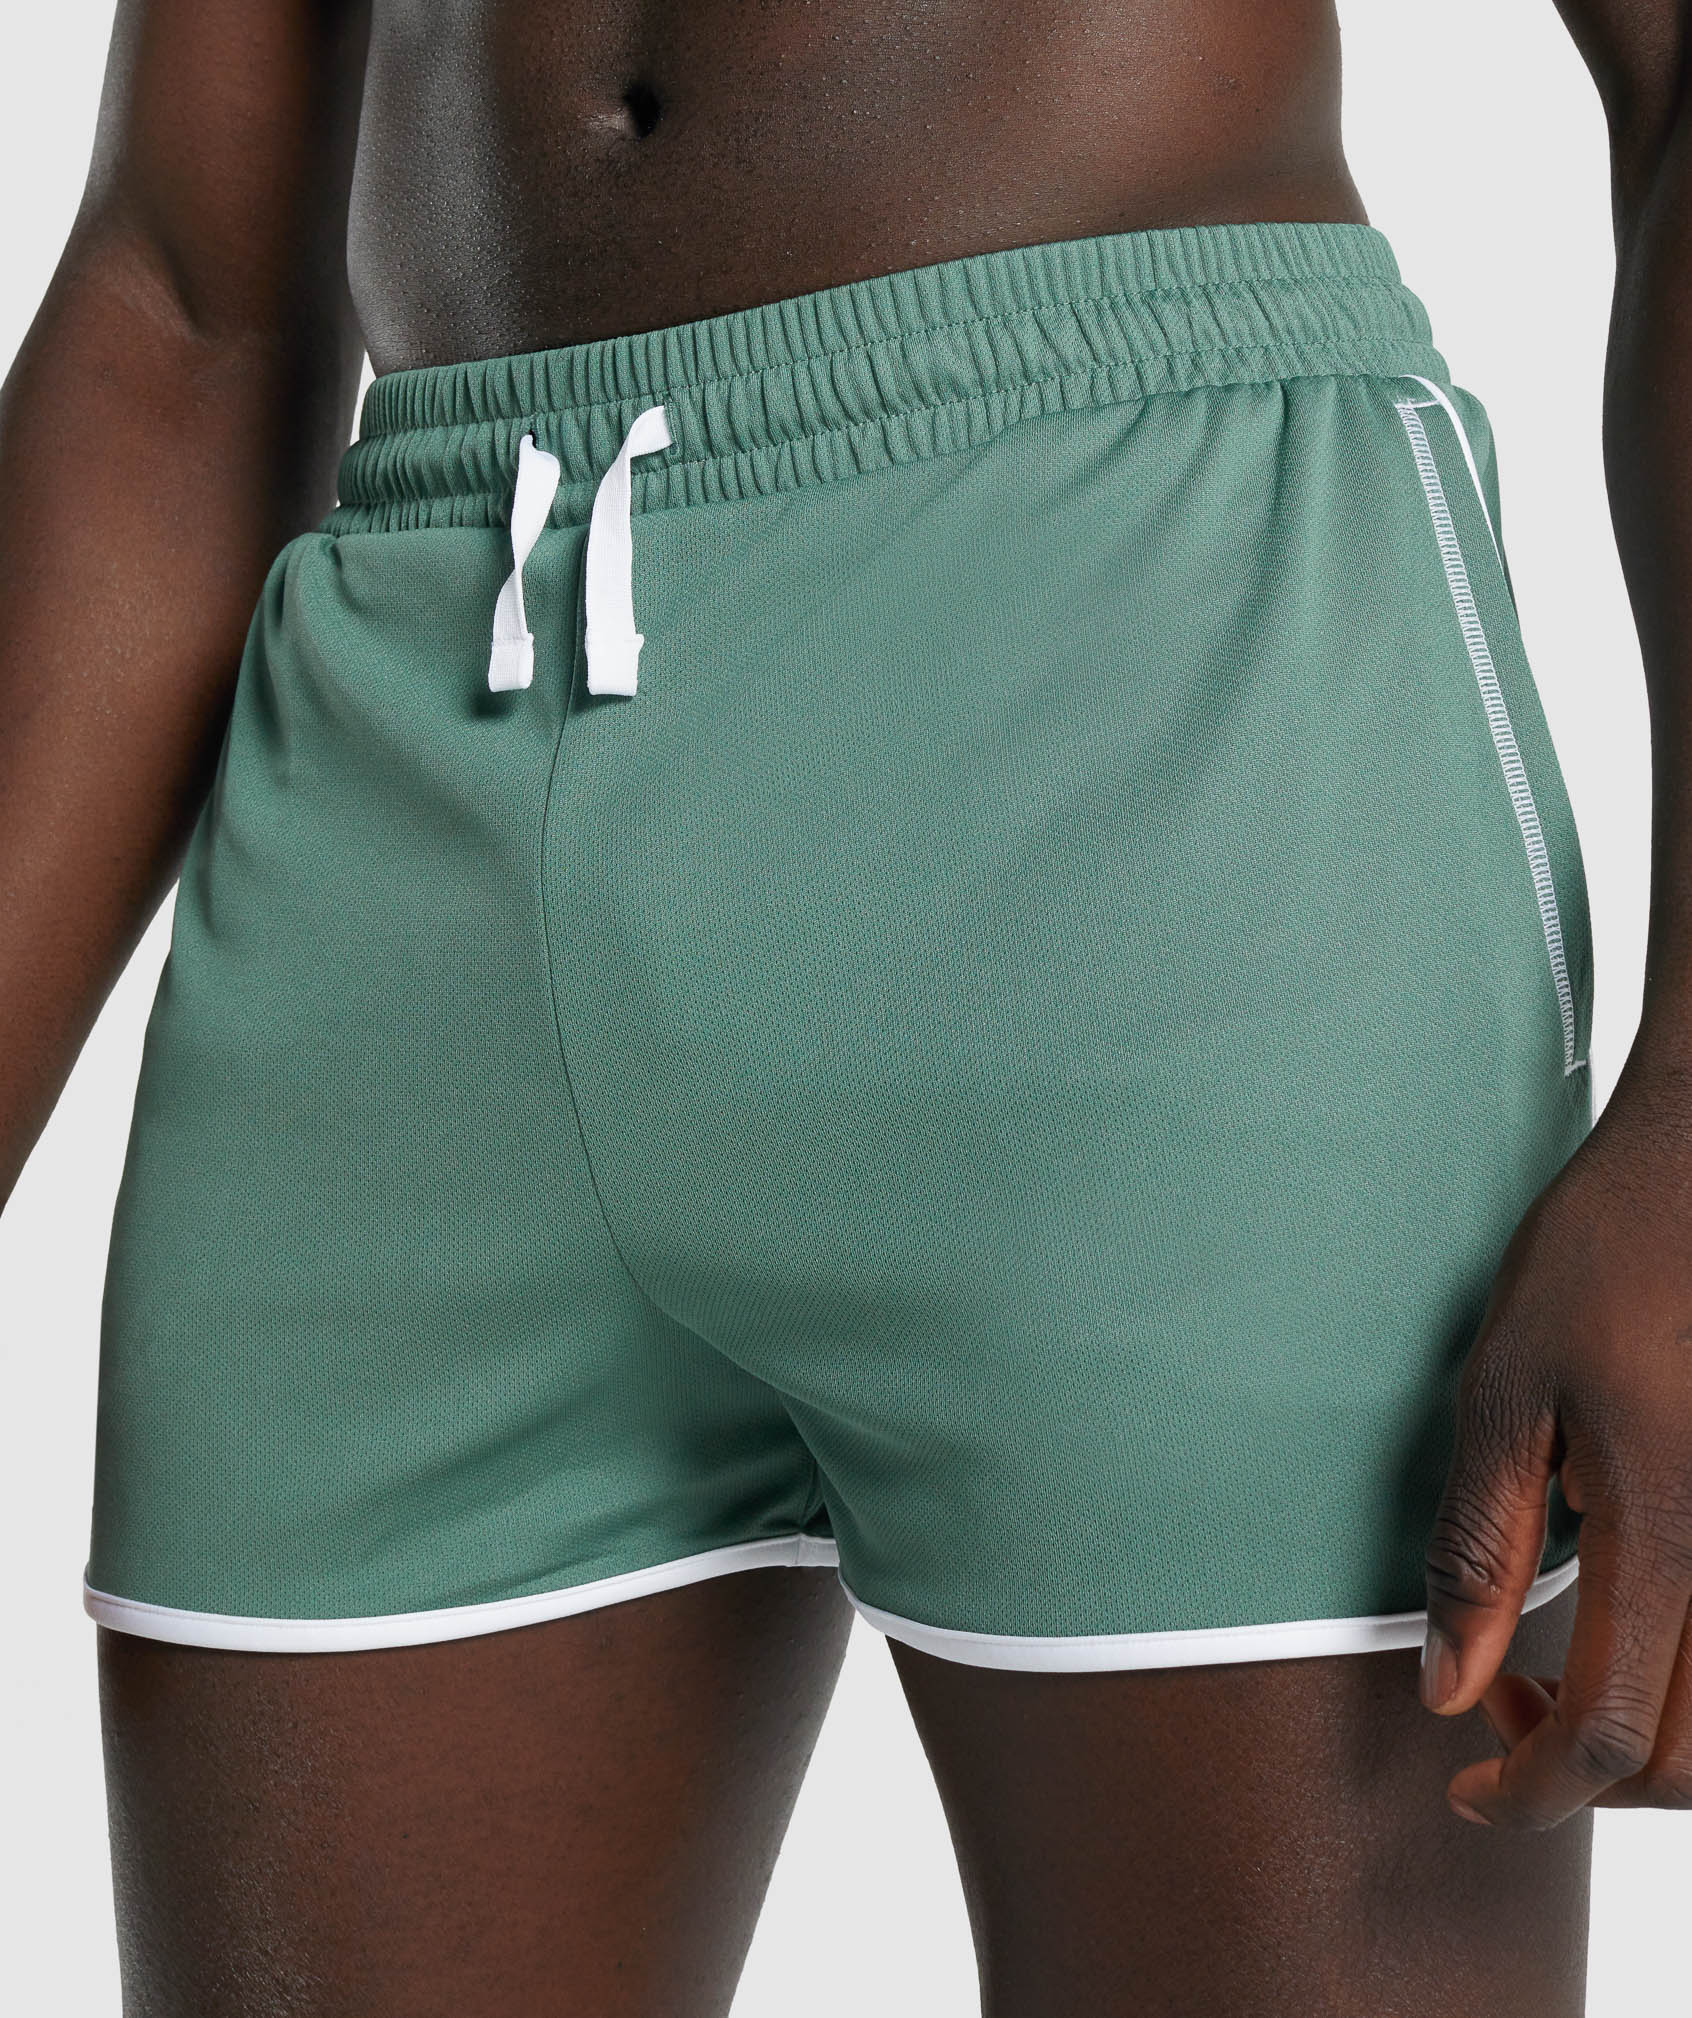 Recess 3" Quad Shorts in Green - view 7